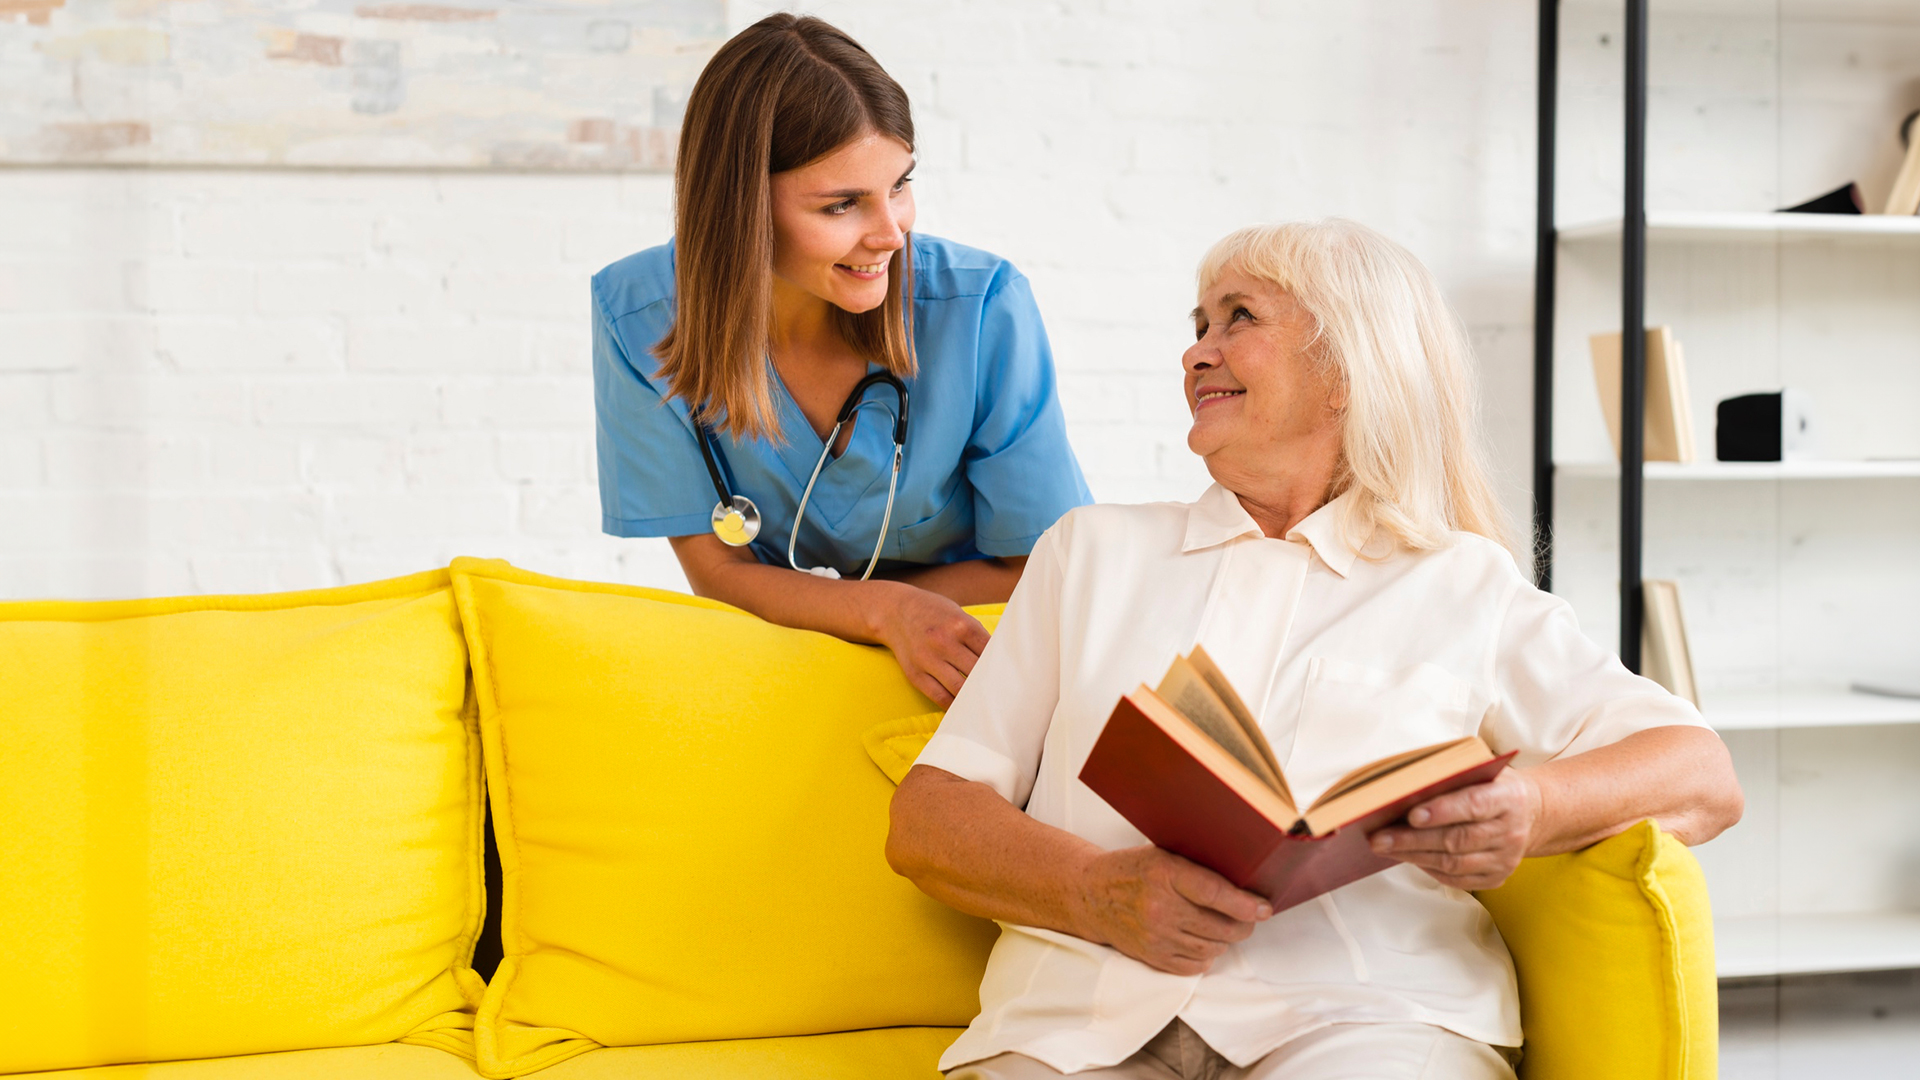 A caregiver and their client, a person with dementia, are sitting together and reading a book. The image illustrates the therapeutic benefits of storytelling for individuals with dementia, promoting engagement and connection through shared narratives.